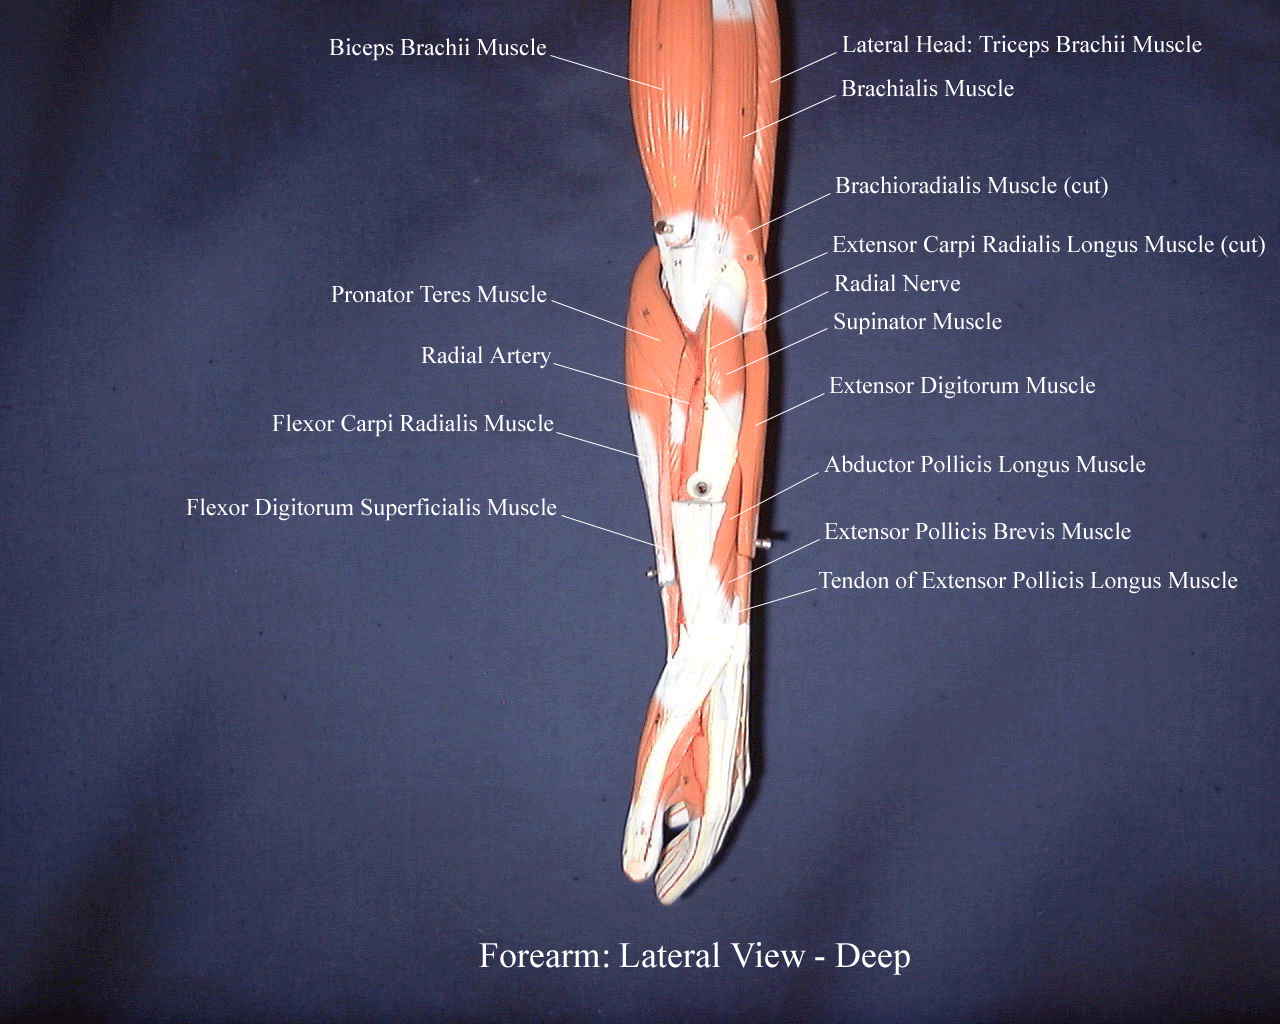 a labeled picture of a forearm model showing the deep muscles of the forearm from a lateral view